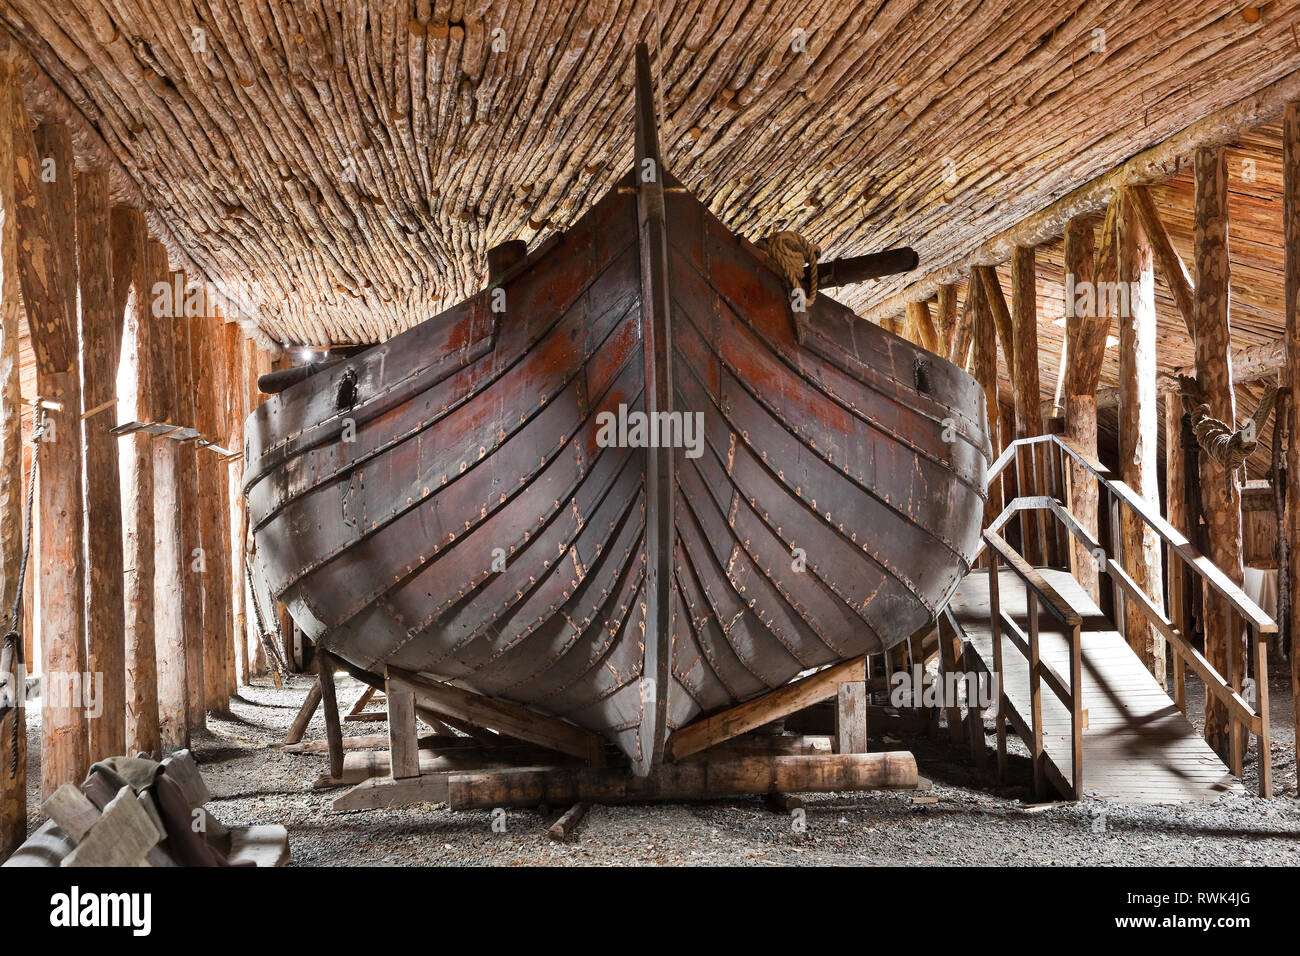 Replica of the Viking ship 'Snorri' in a boat shed at Norstead Viking Village and Port of Trade. The ship retraced the 1,500-mile journey of Leif Ericson from Greenland to L'Anse aux Meadows, Newfoundland, Canada, around the year 1000. Stock Photo